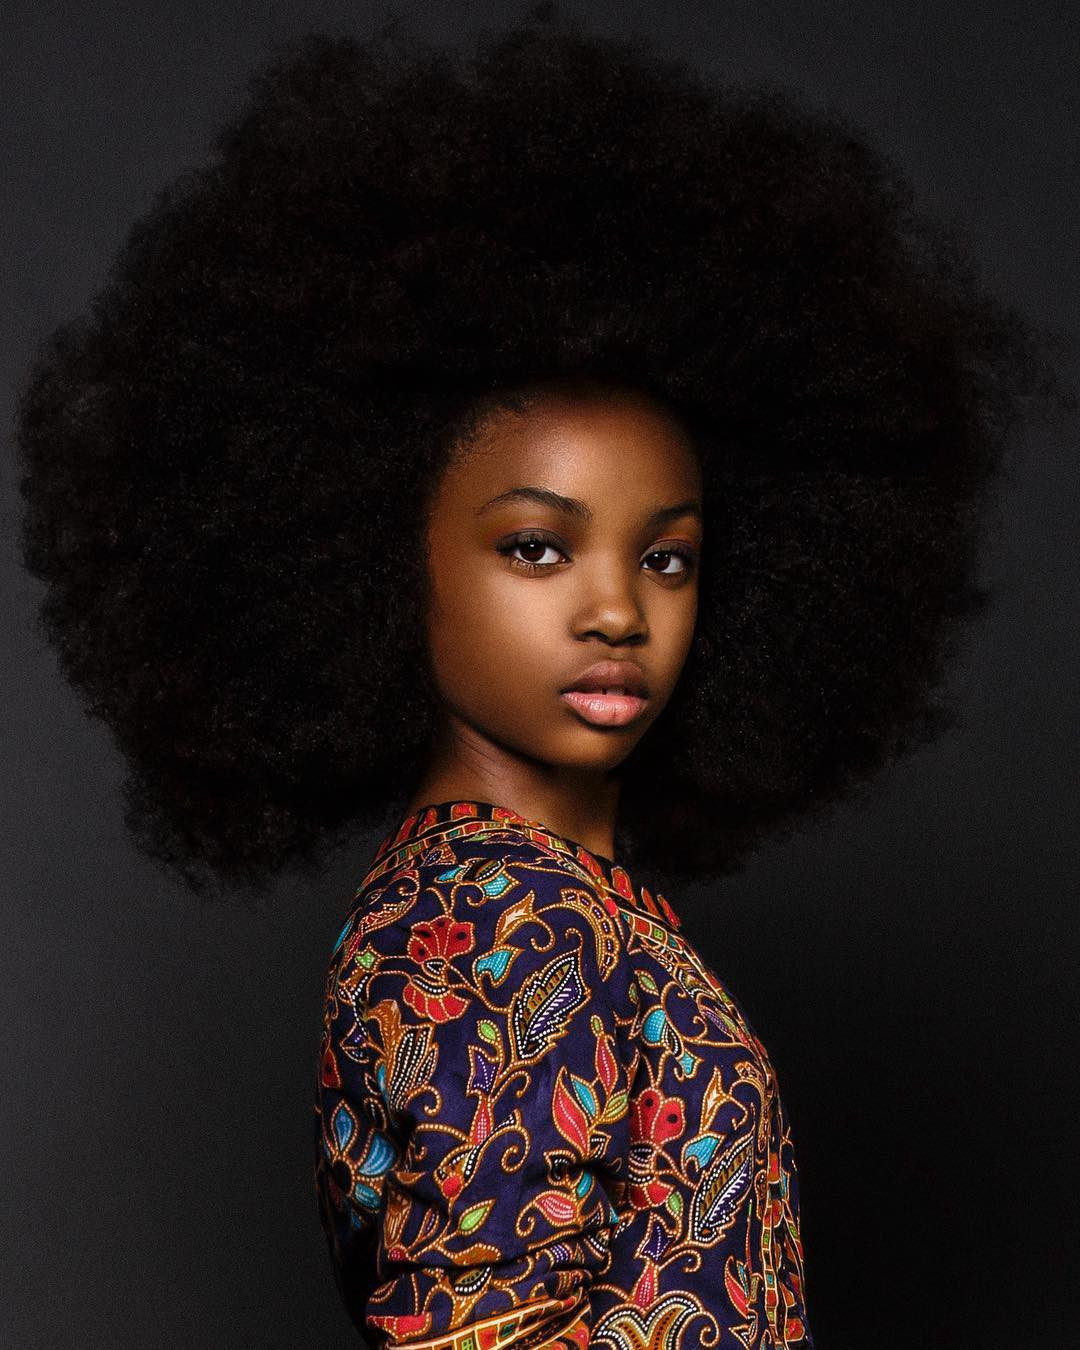 Celai West 12 years old Fashion Professional Model & Activist